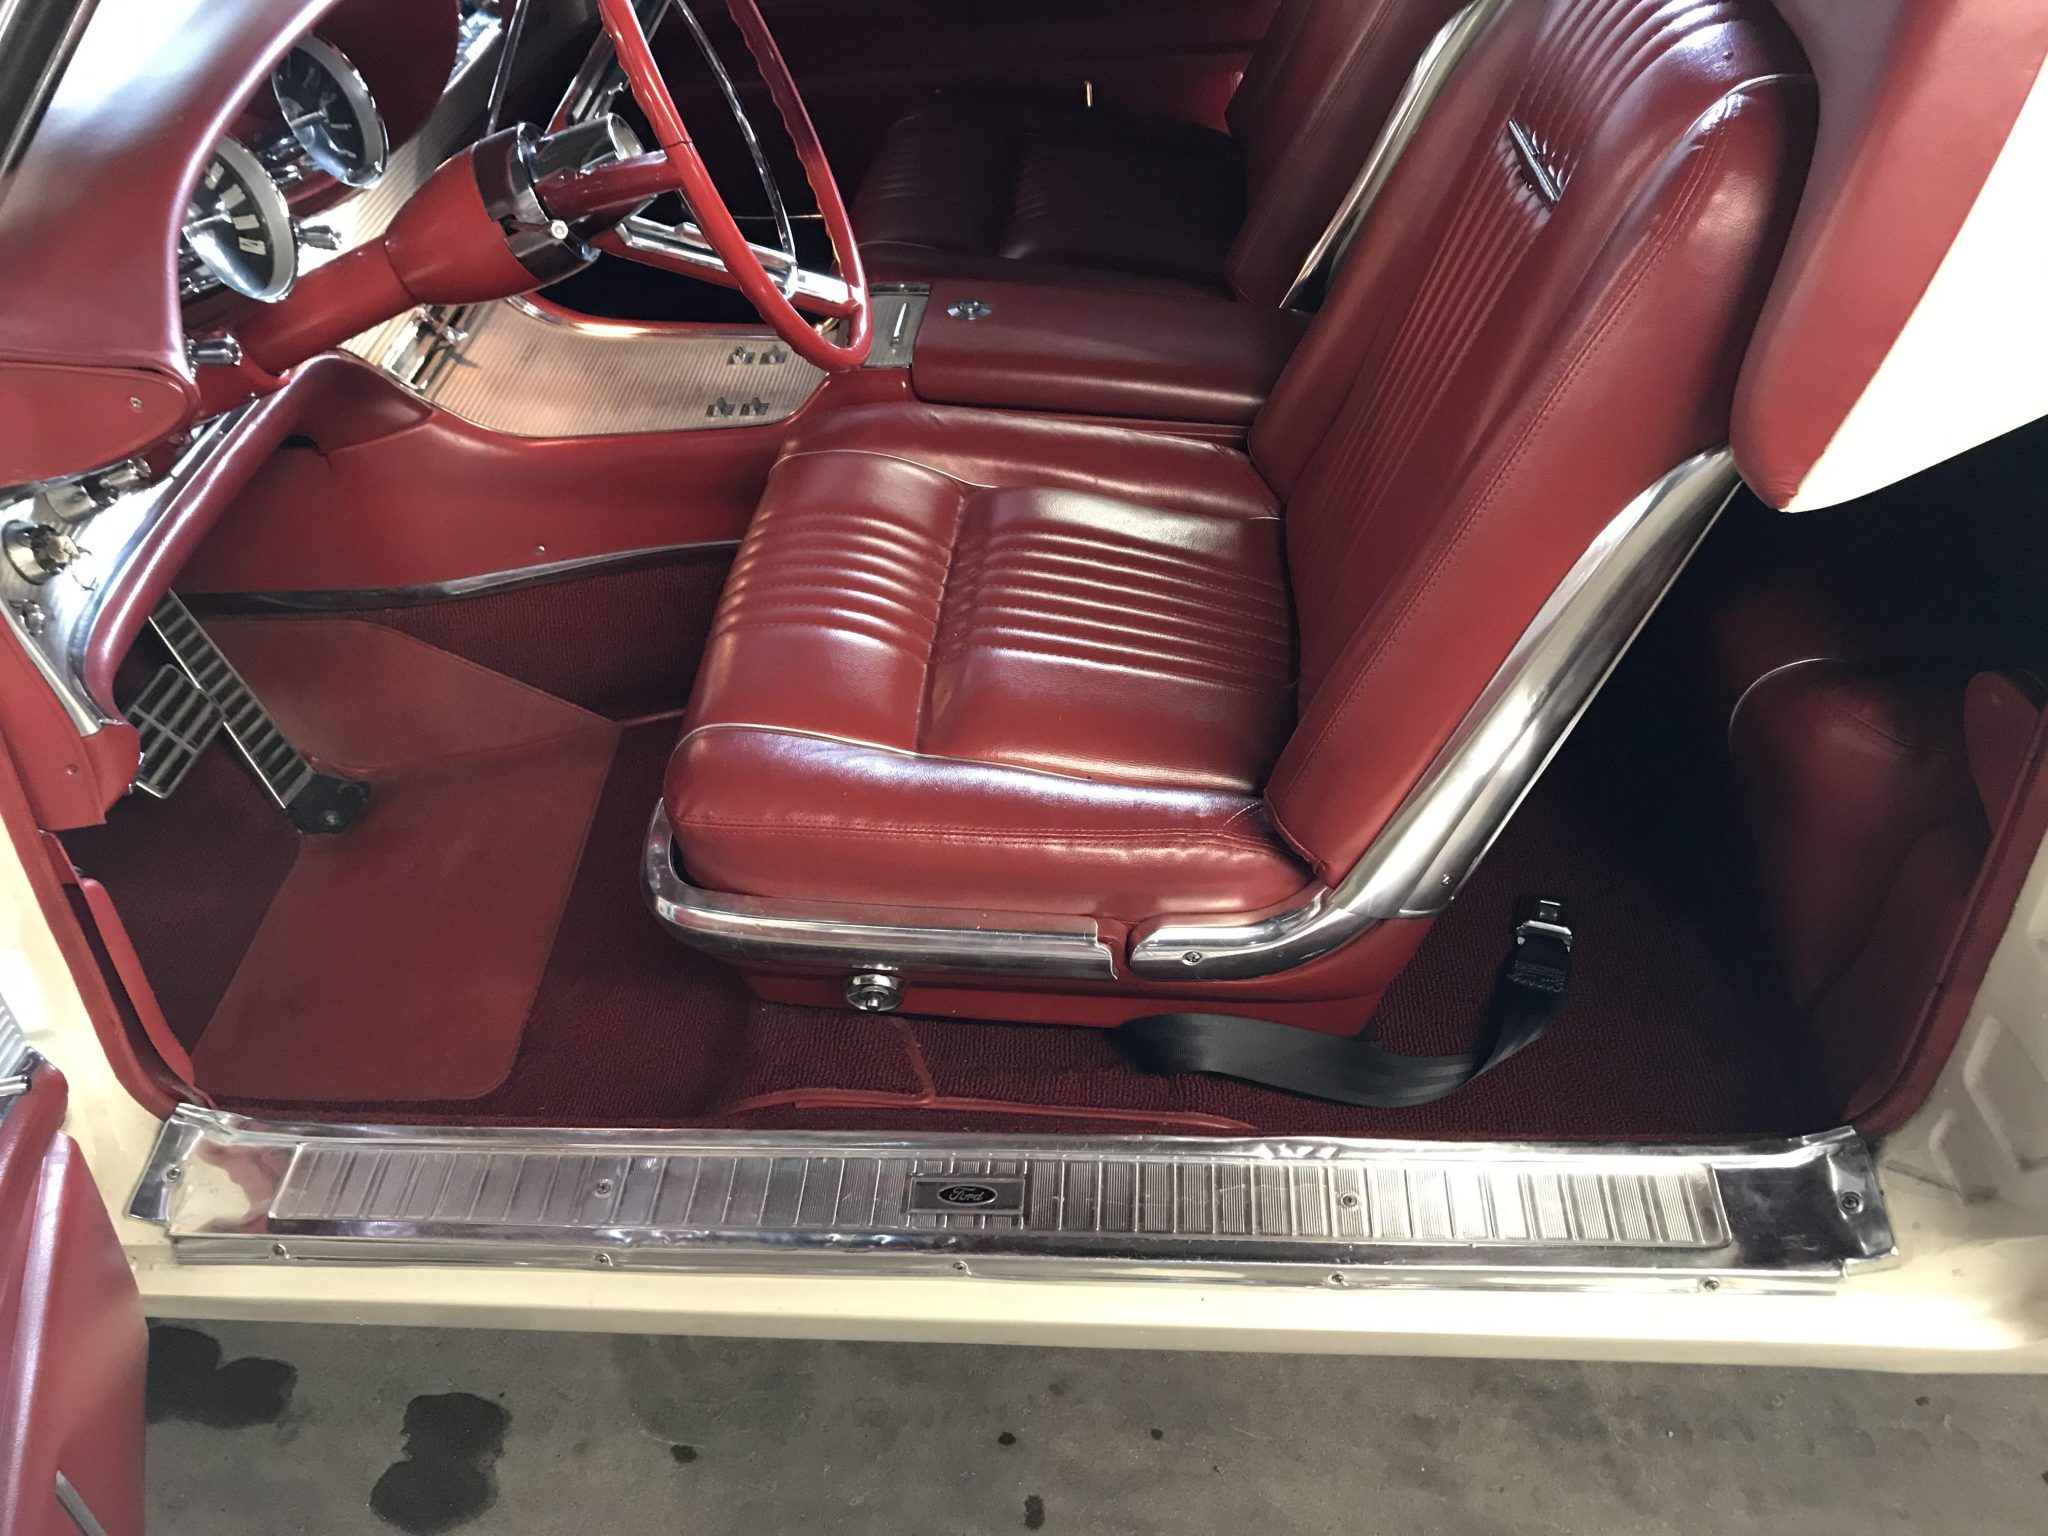 1963 Ford Thunderbird Driver's Seat